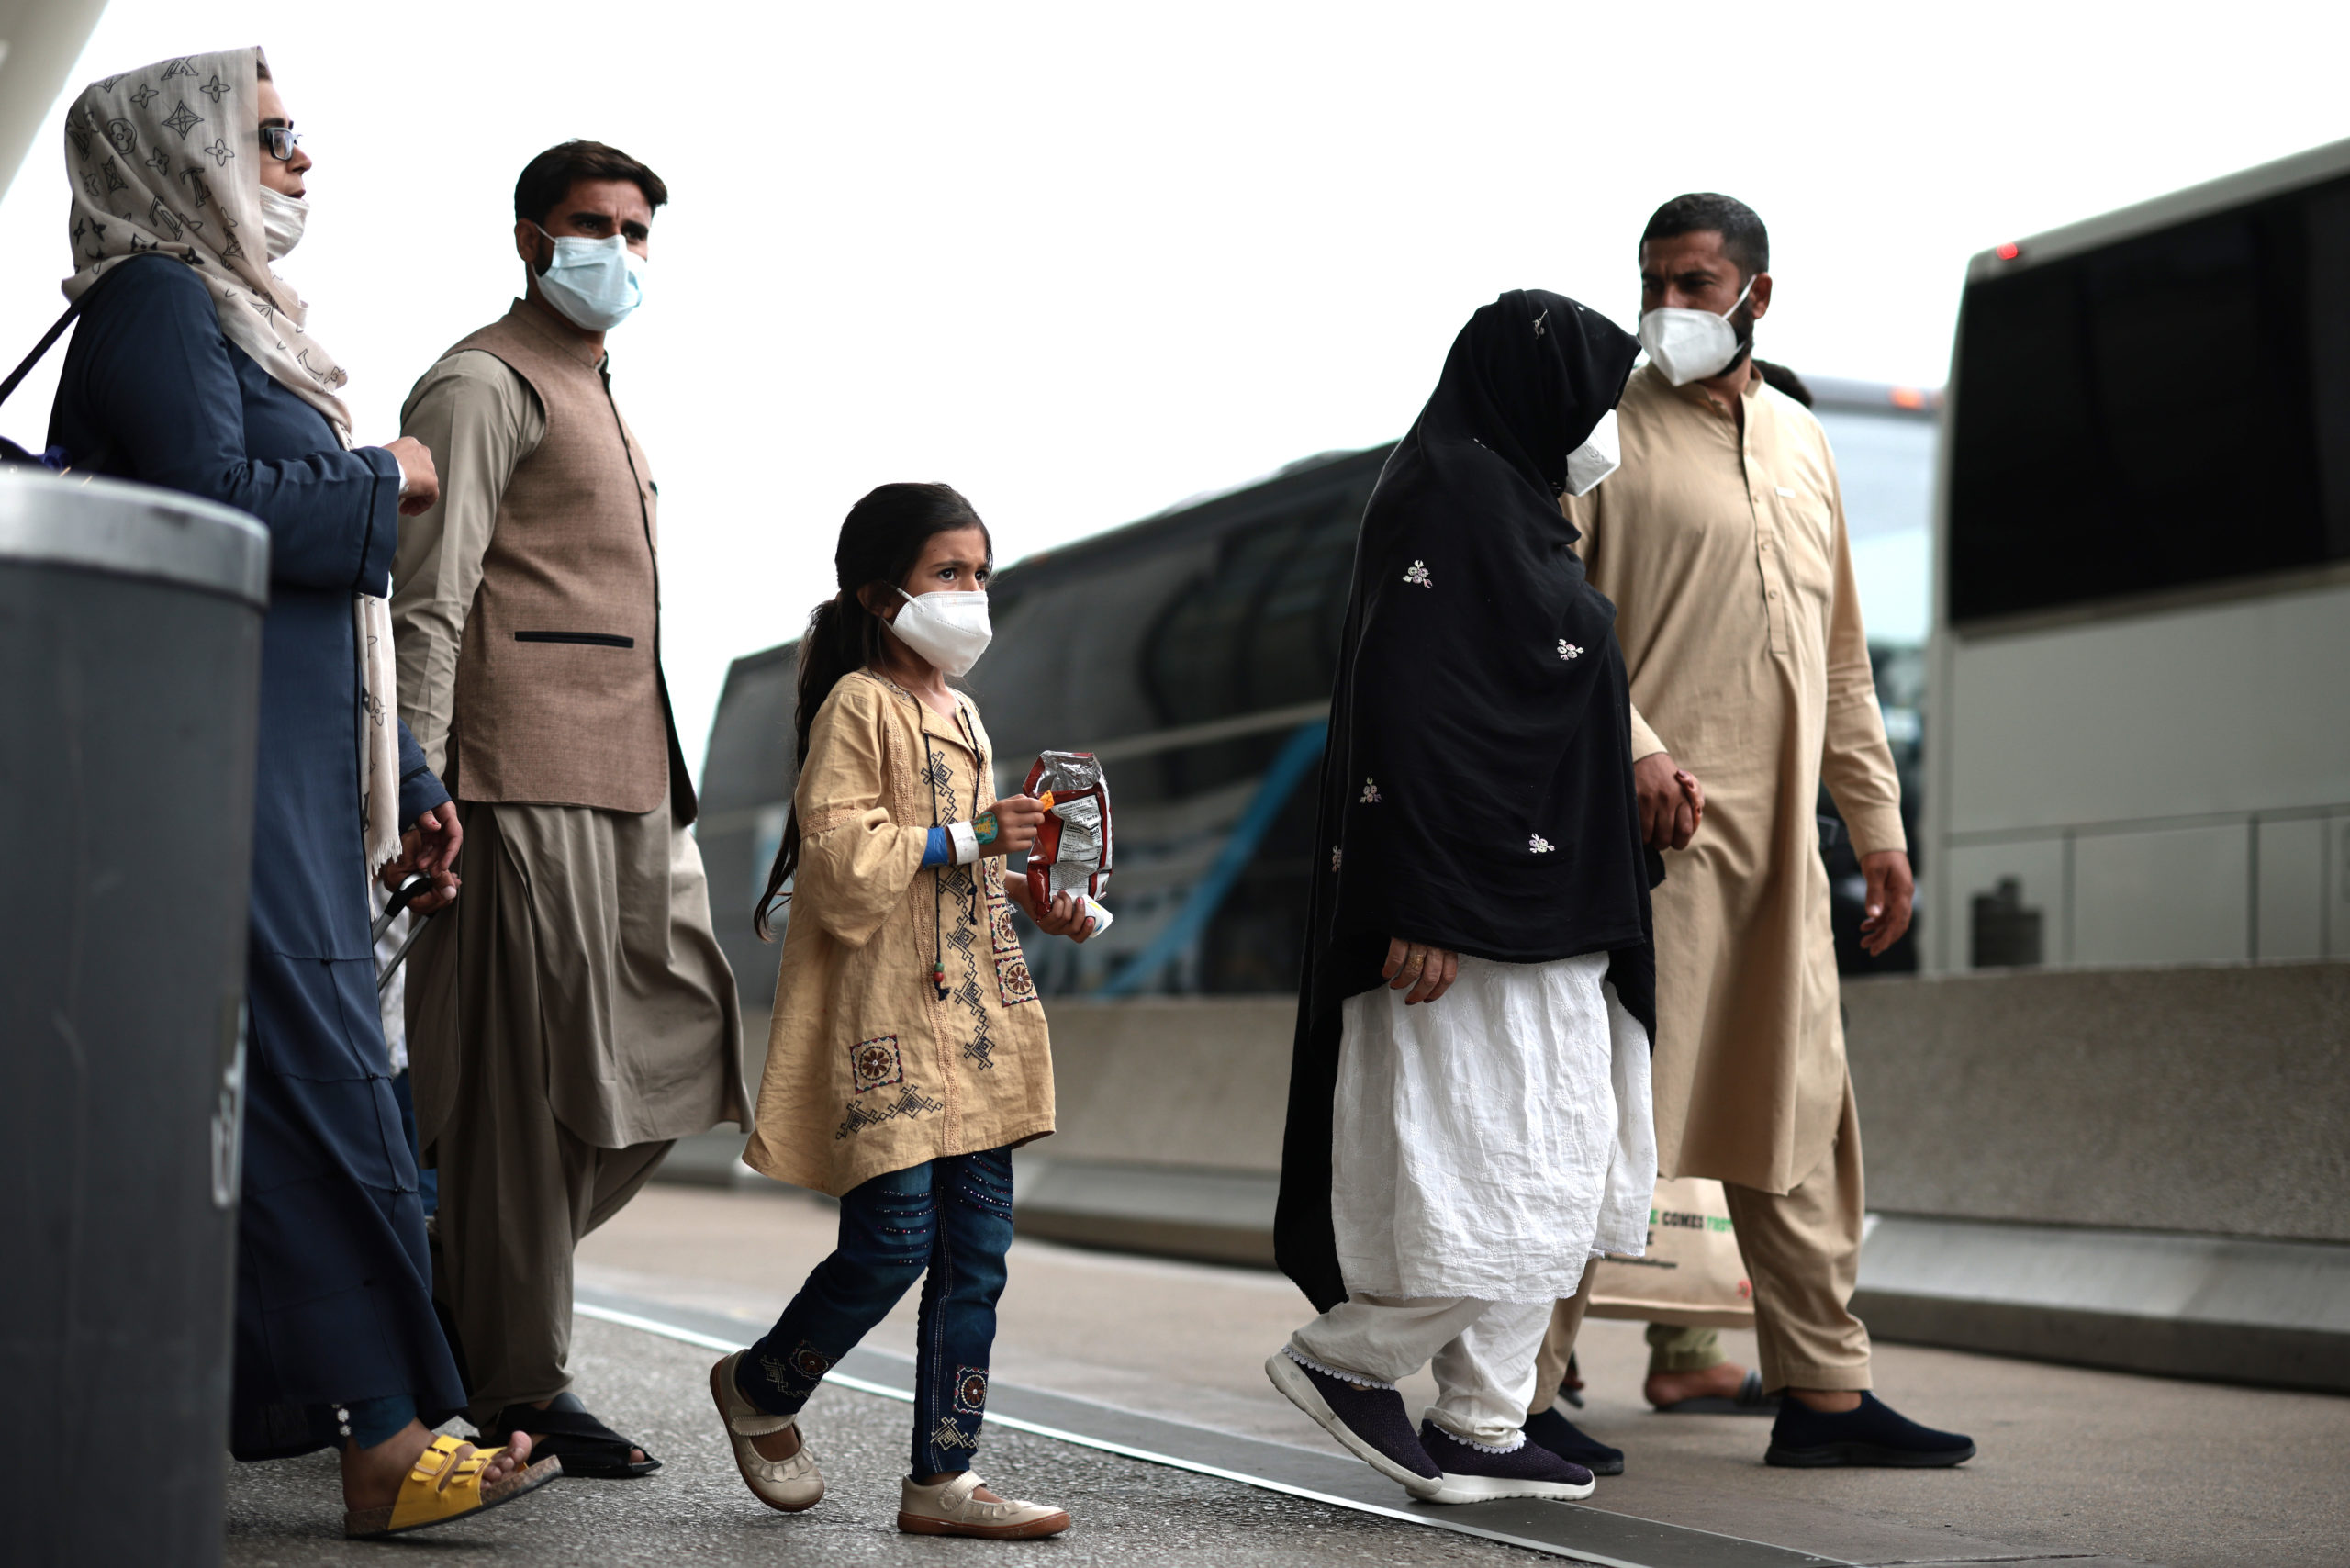  Refugees walk to board a bus at Dulles International Airport after being evacuated from Kabul following the Taliban takeover of Afghanistan on August 31, 2021 in Dulles, Virginia. (Photo by Anna Moneymaker/Getty Images)